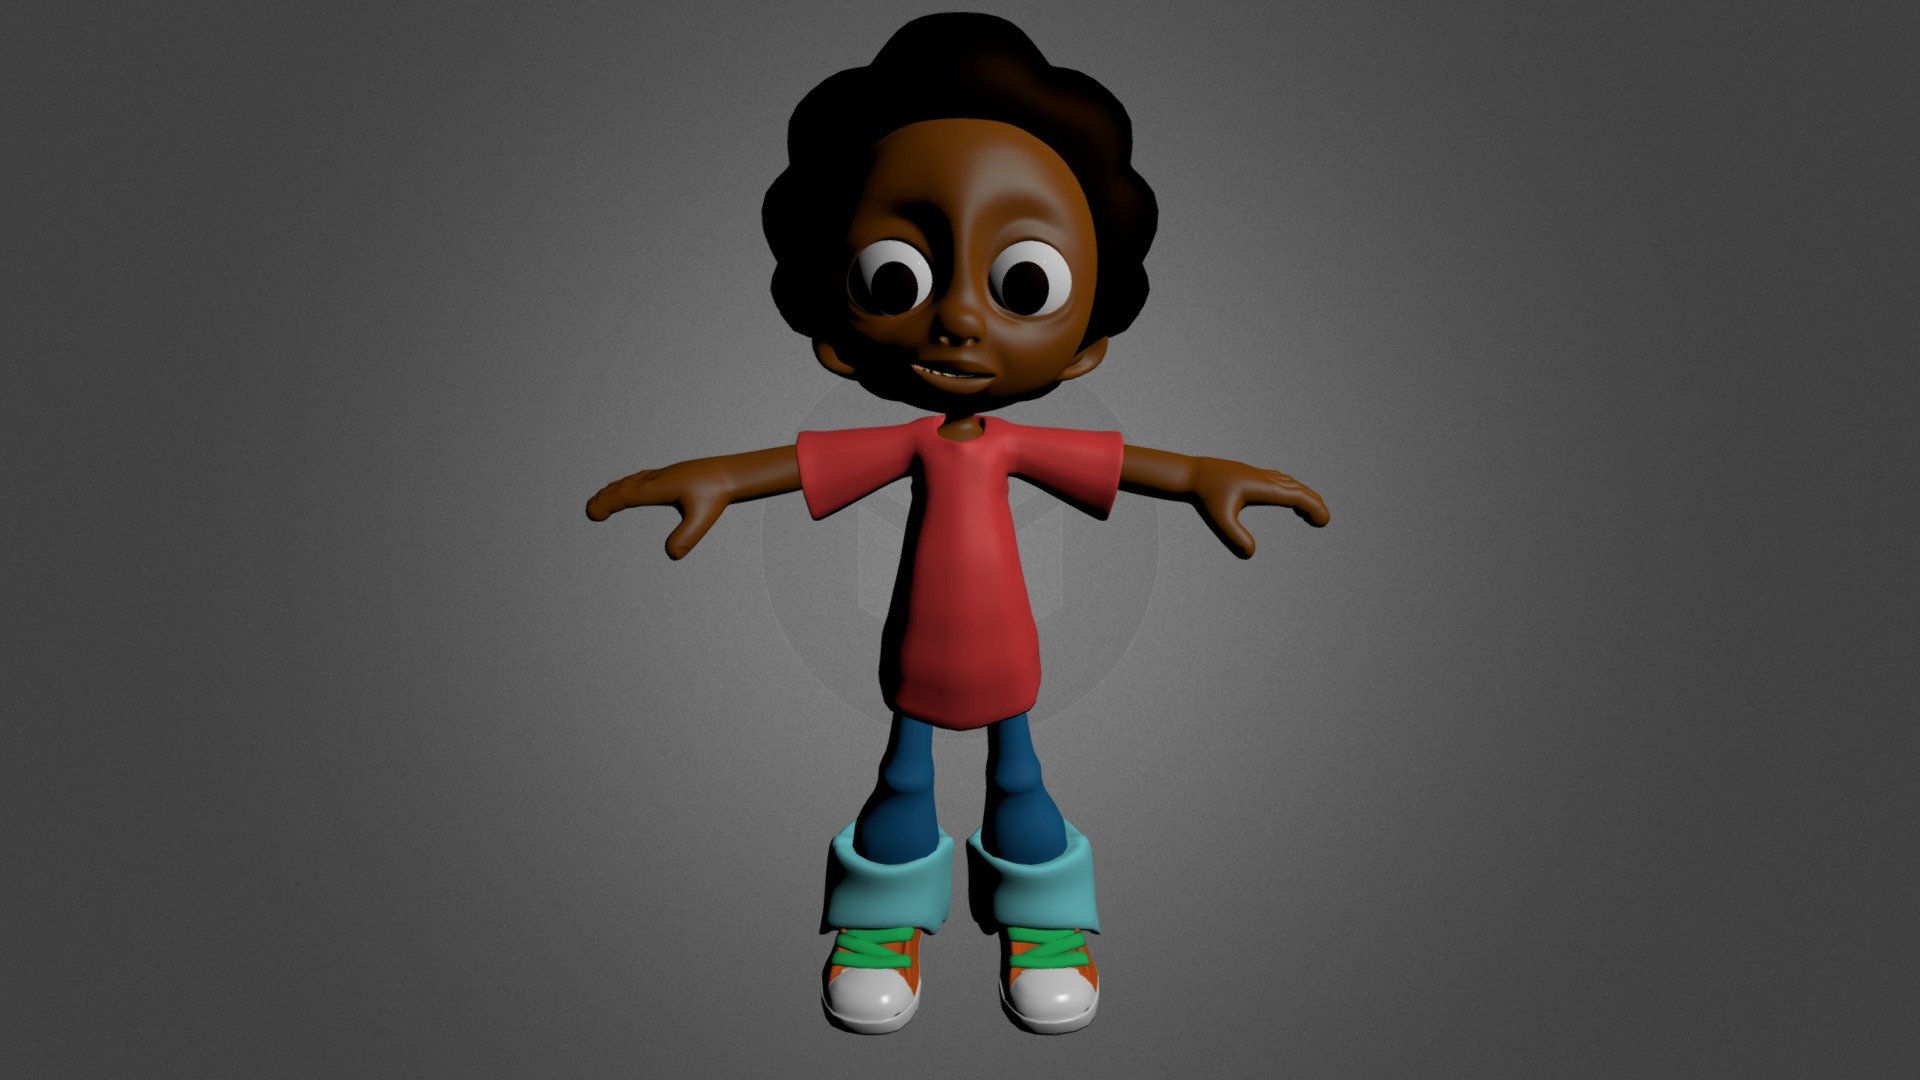 This is the rigged animatable version of the Milo character 3d model